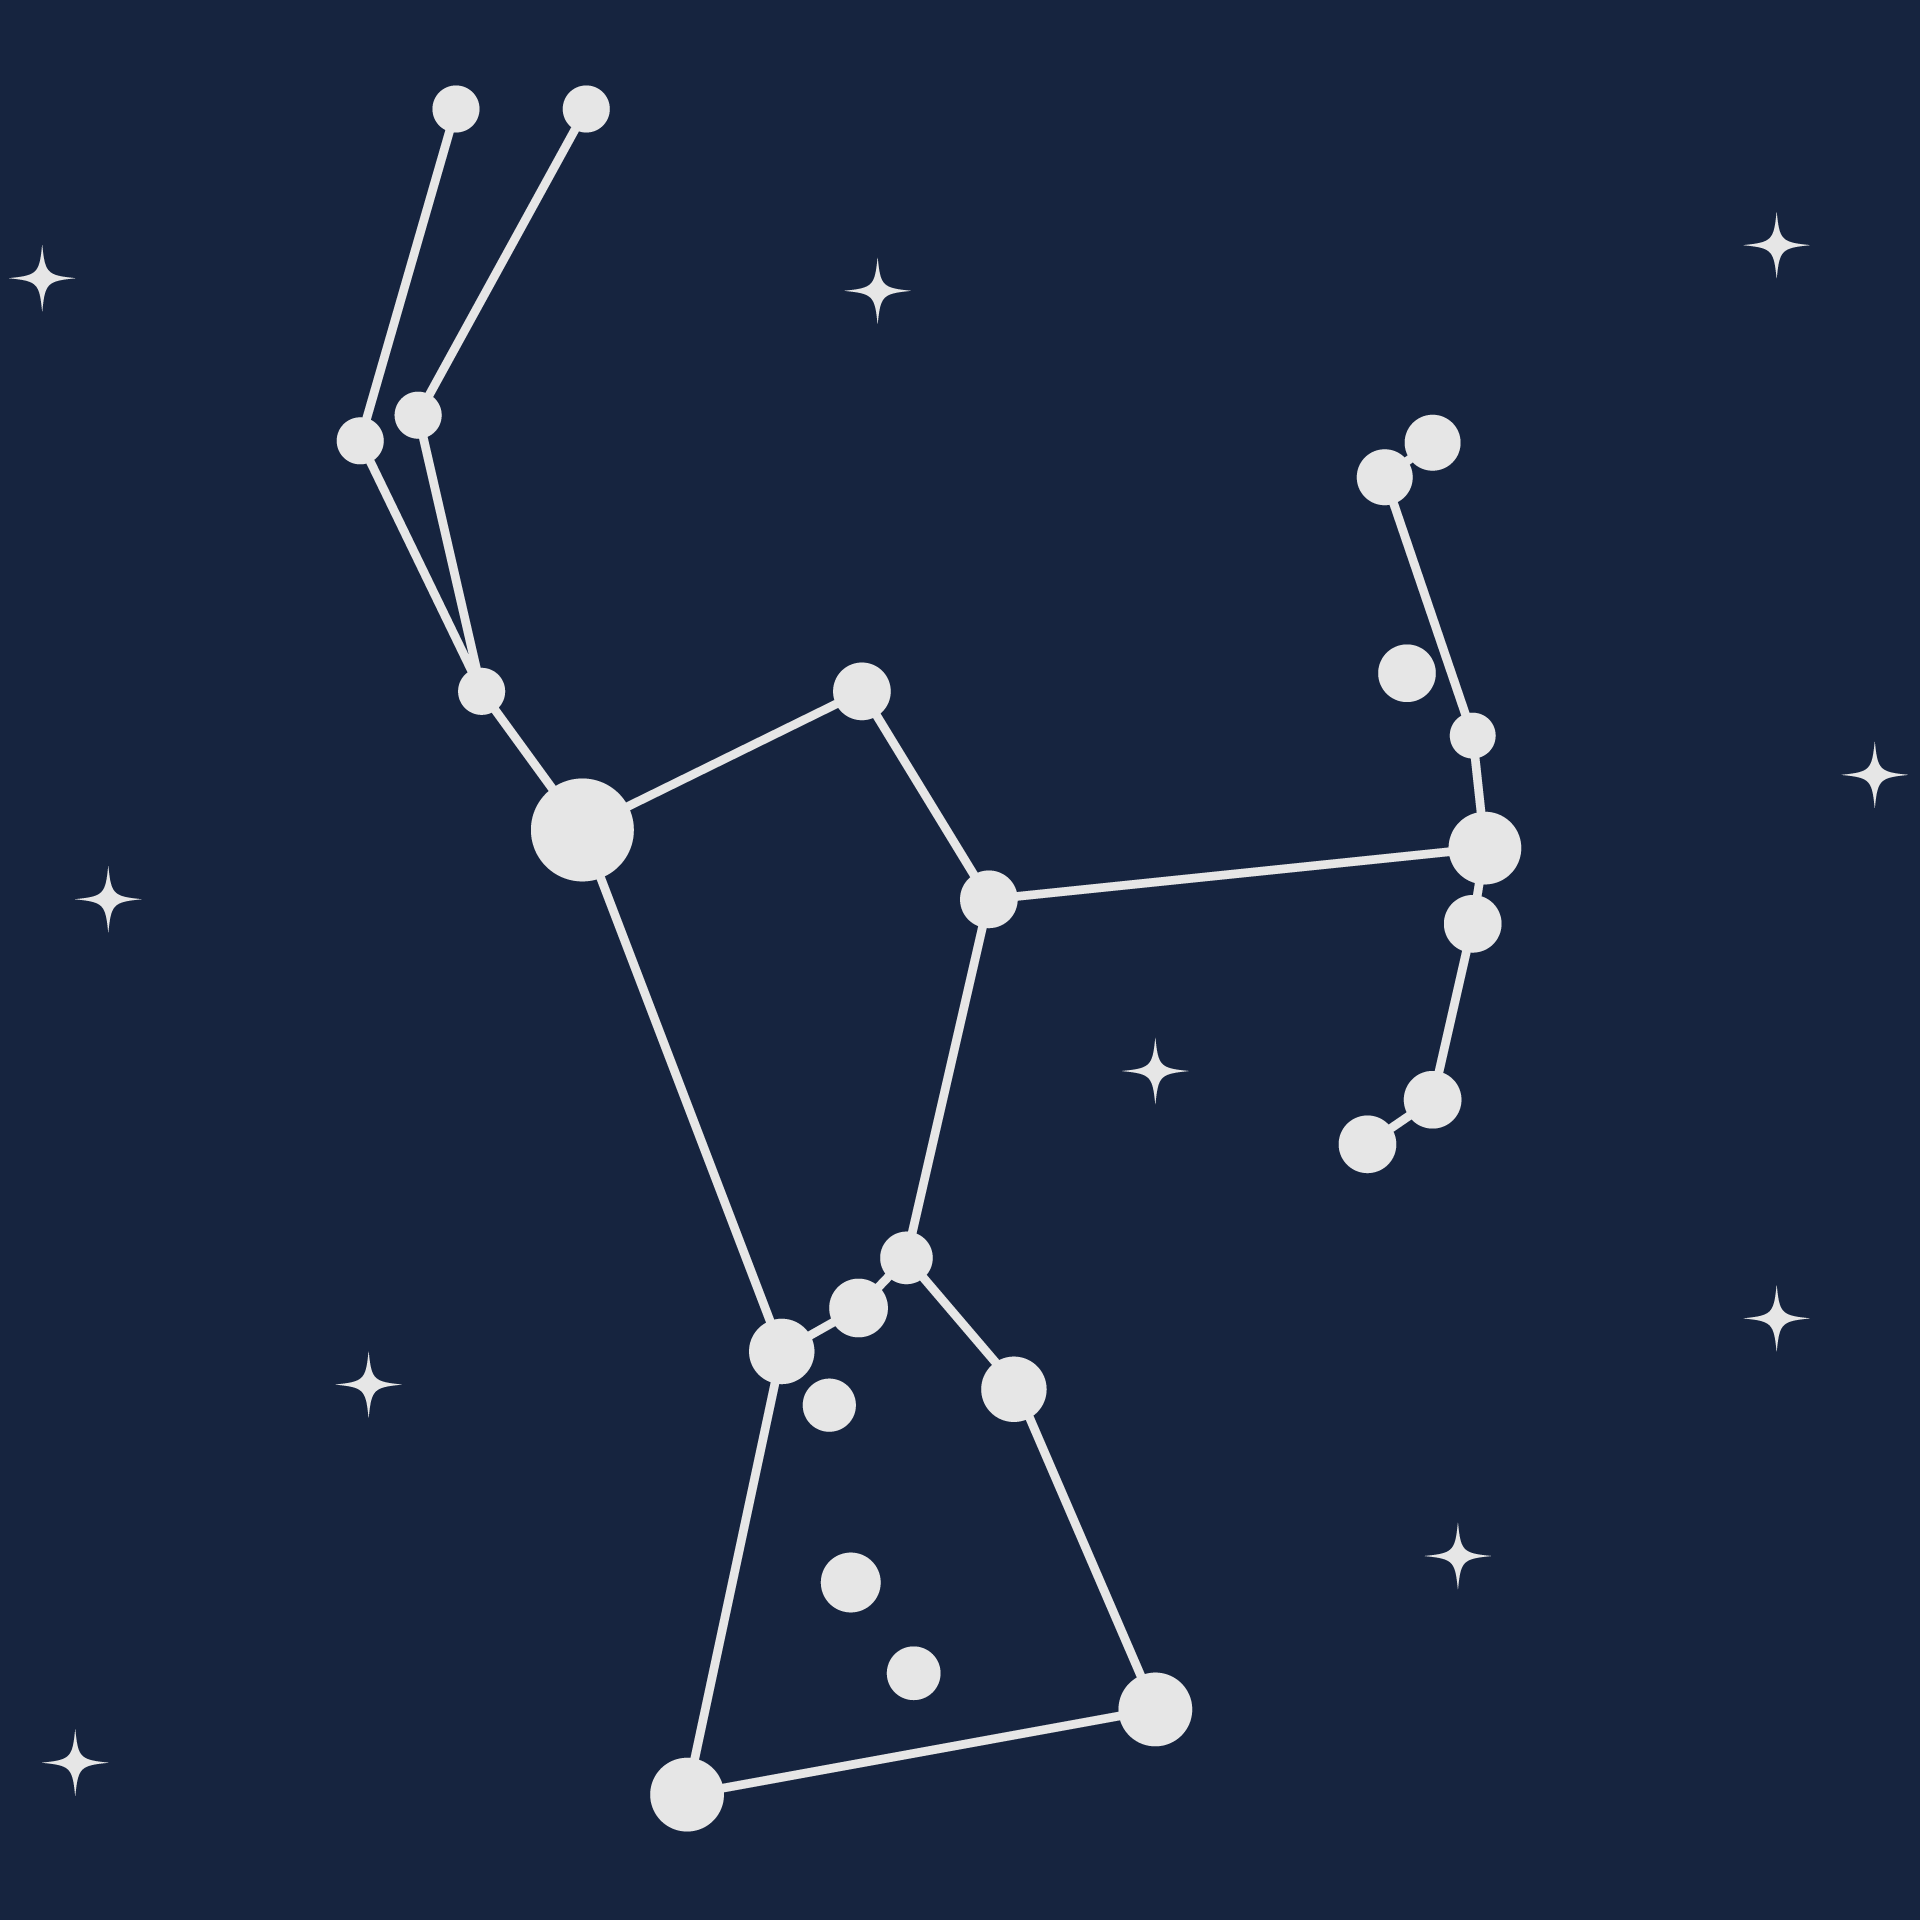 Illustration of the Orion constellation